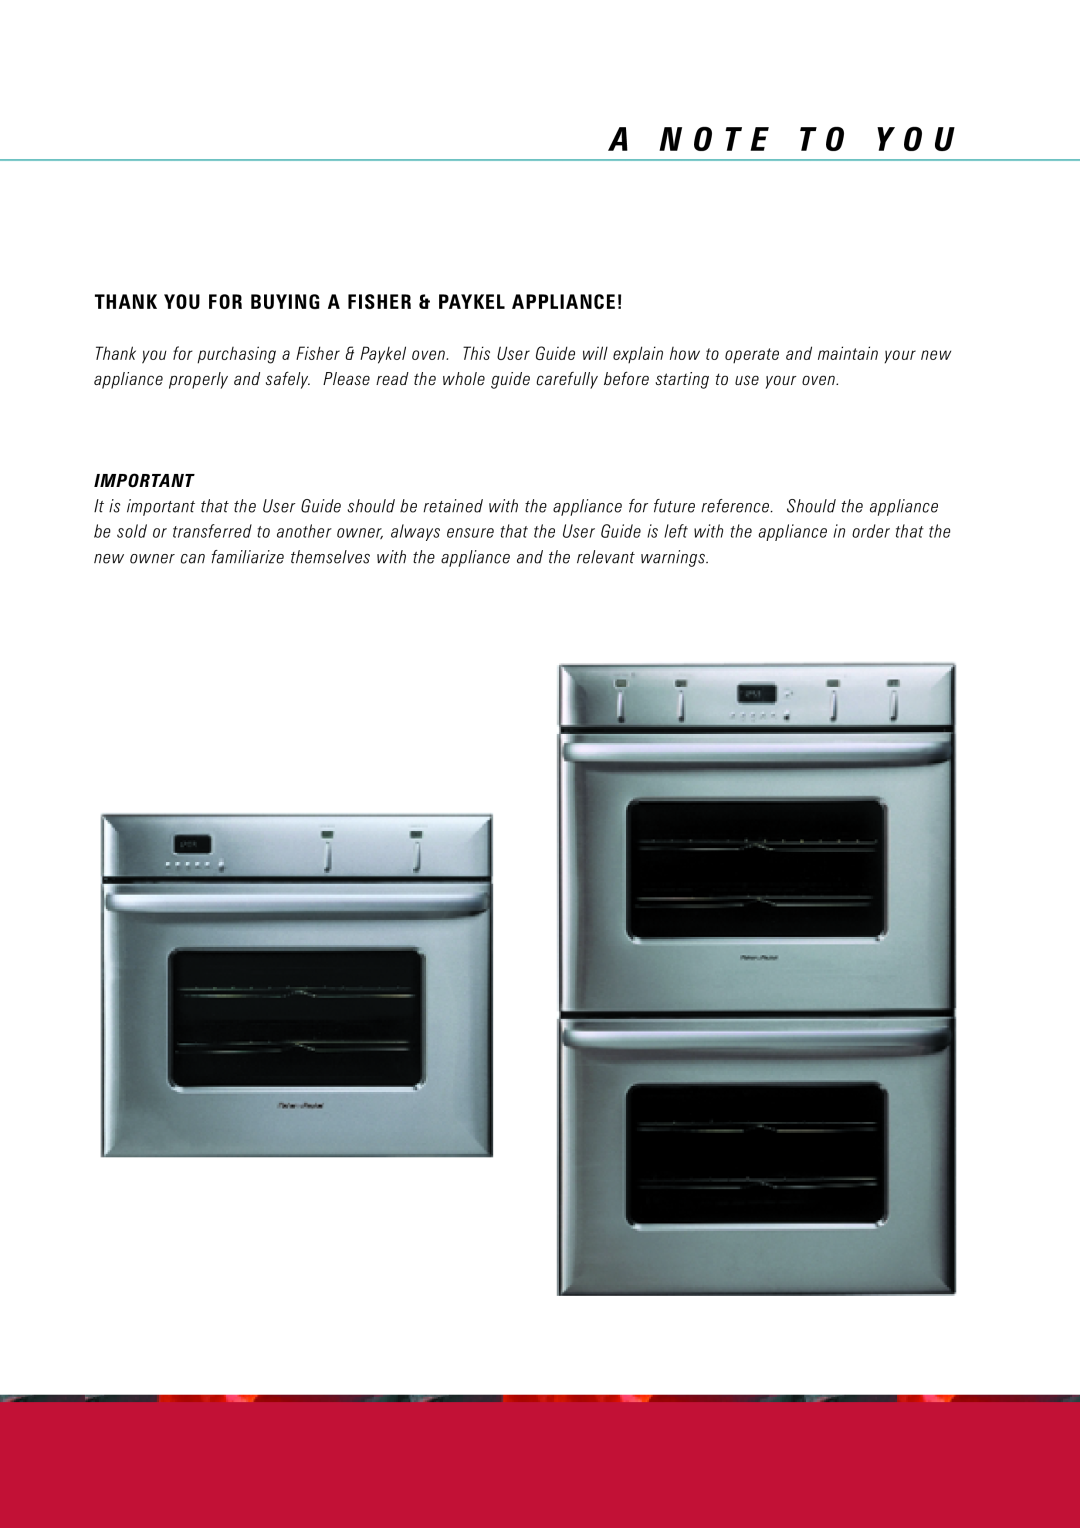 Fisher & Paykel AeroTech manual A N O T E T O Y O U, Thank You For Buying A Fisher & Paykel Appliance 